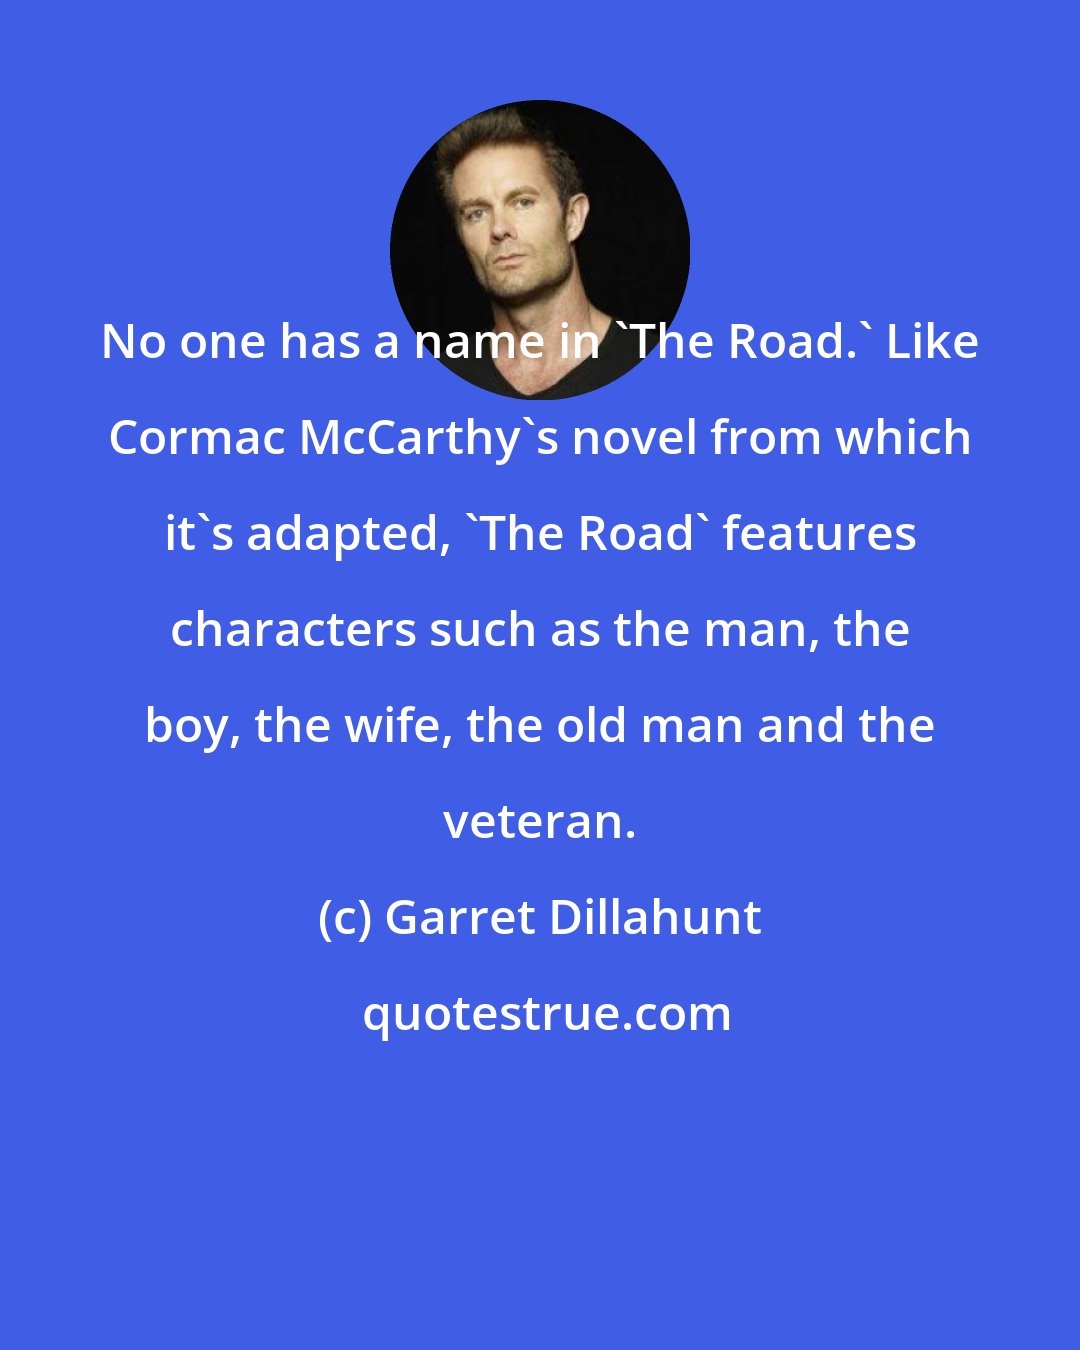 Garret Dillahunt: No one has a name in 'The Road.' Like Cormac McCarthy's novel from which it's adapted, 'The Road' features characters such as the man, the boy, the wife, the old man and the veteran.